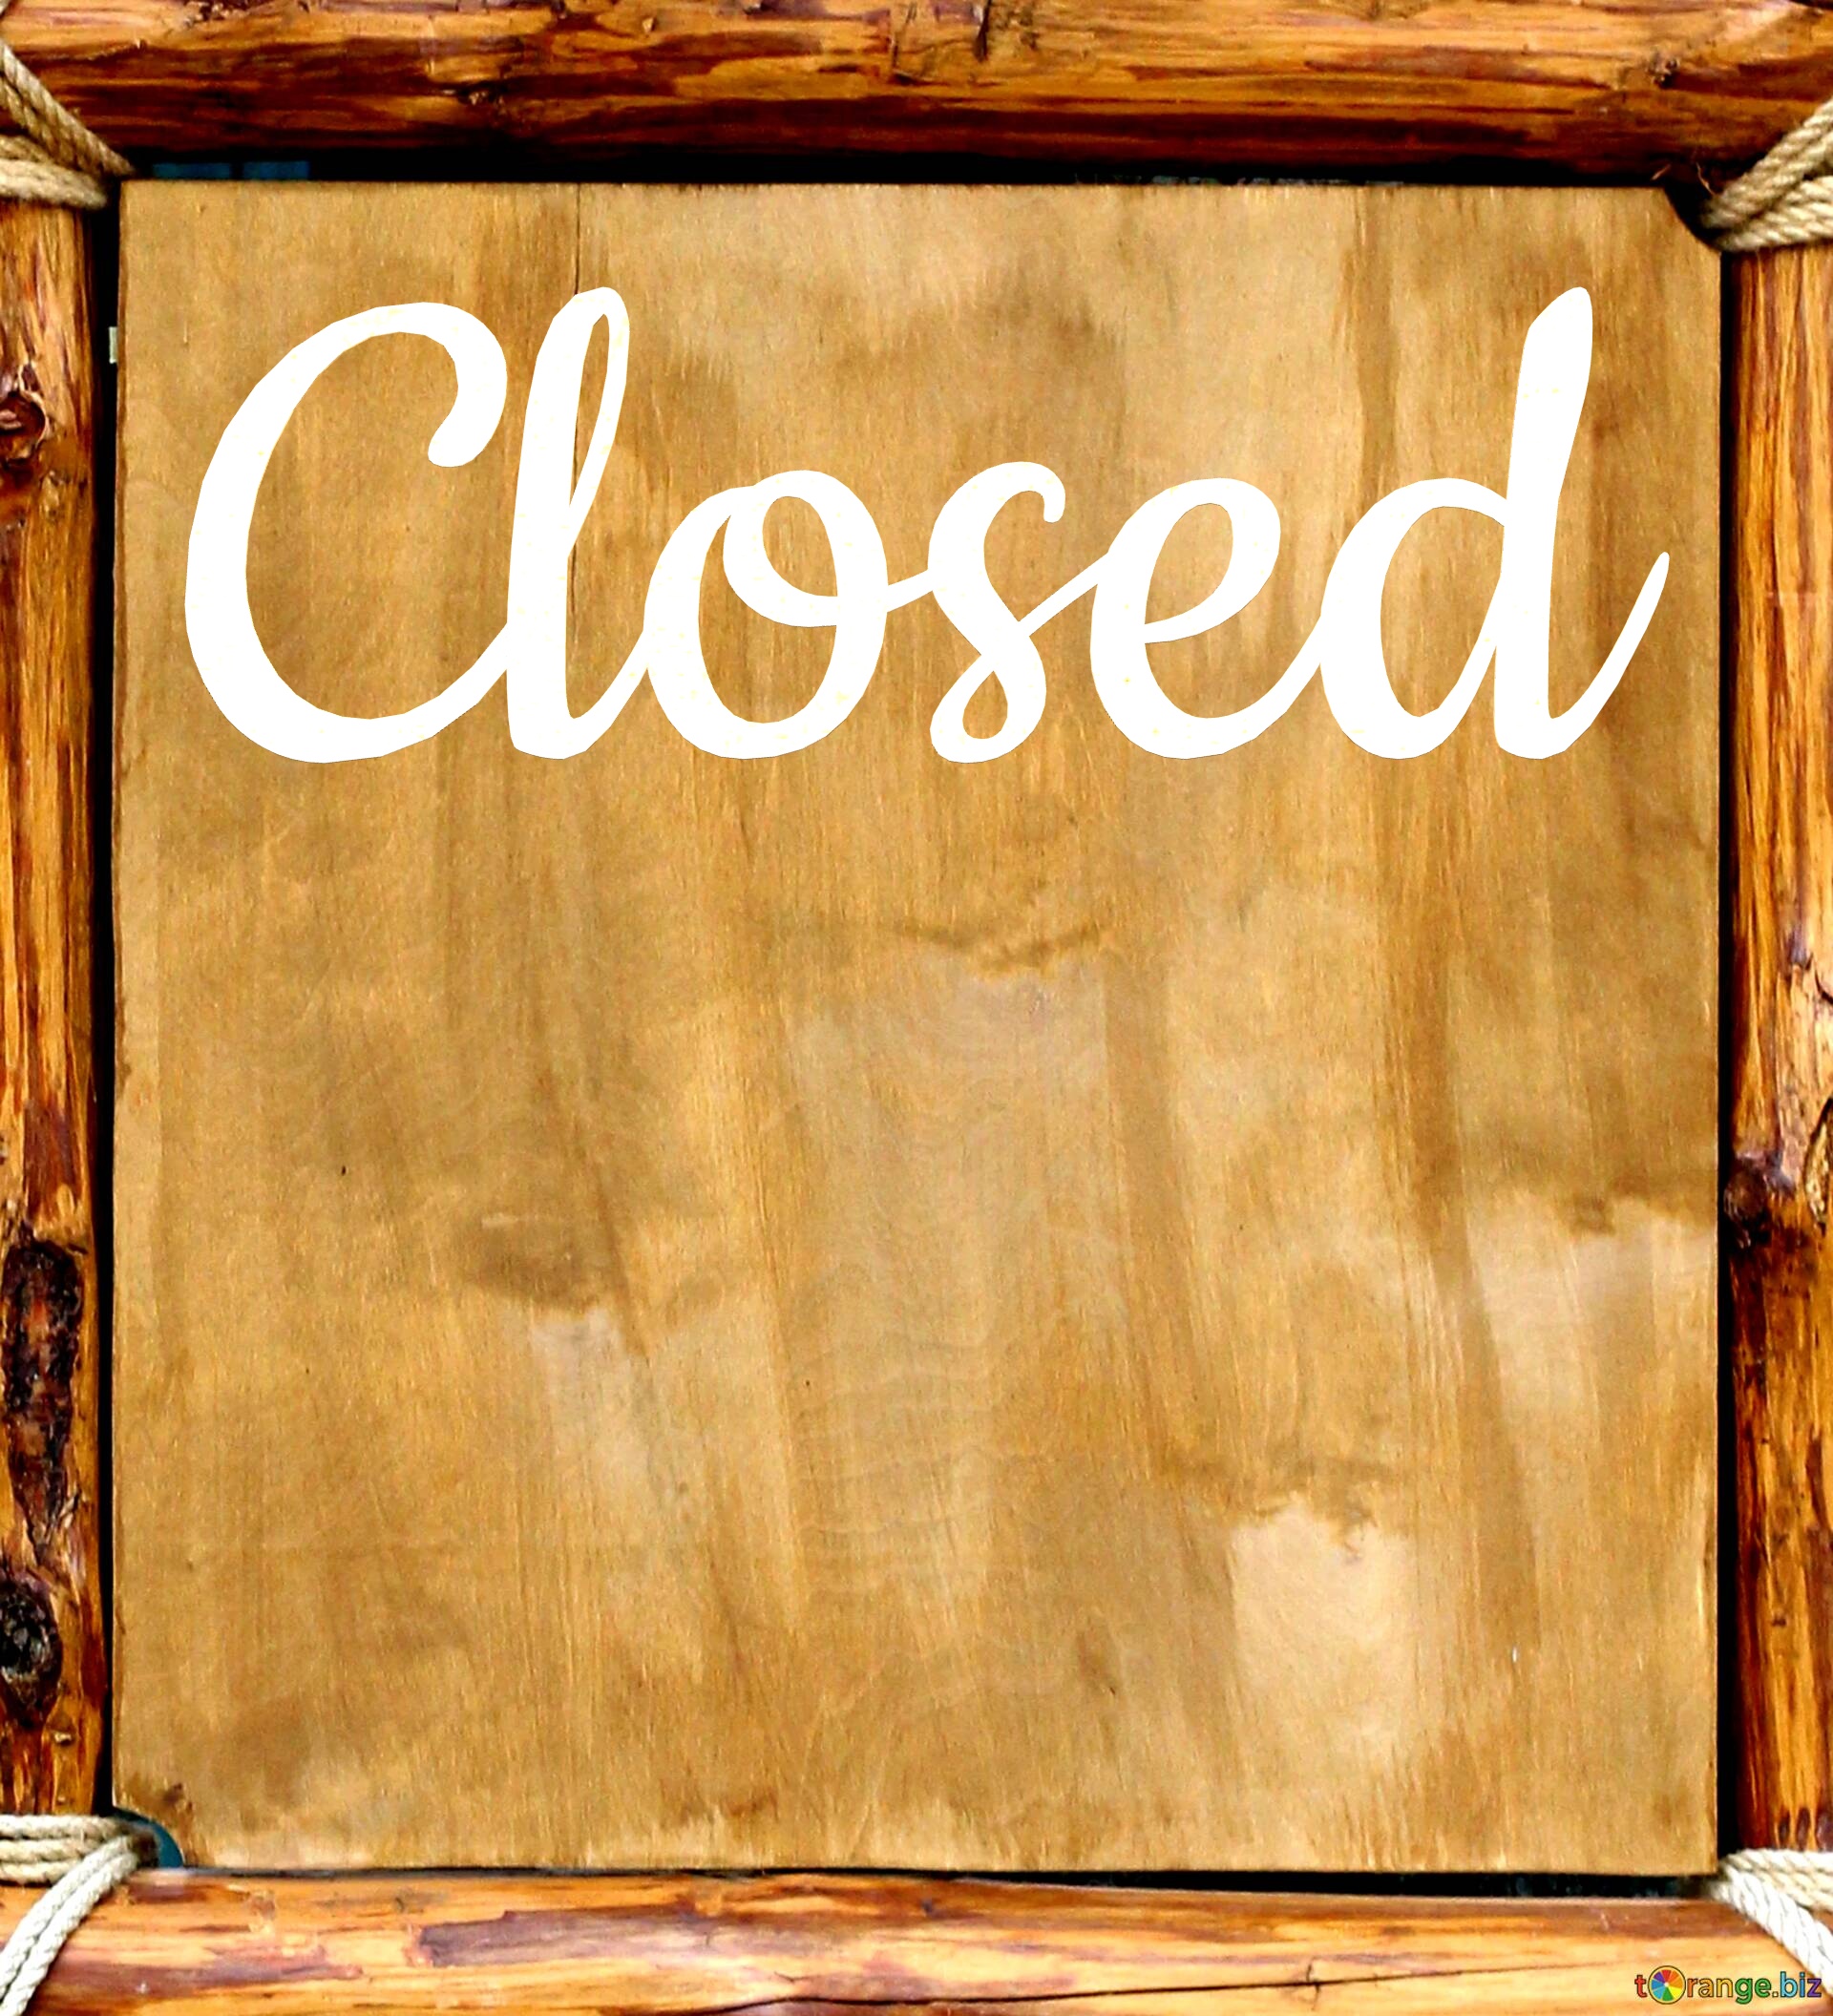 Closed   wooden board №0